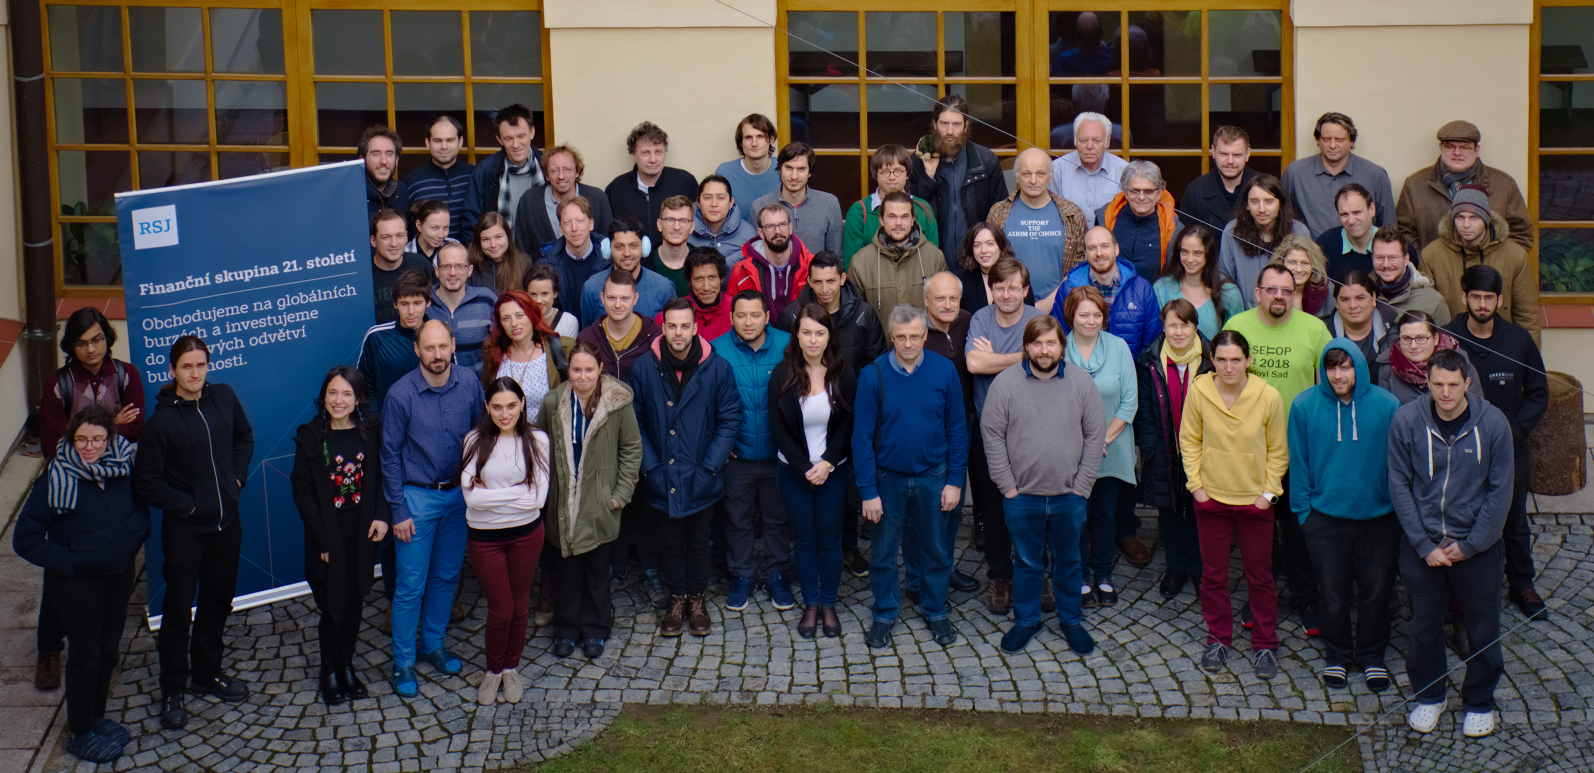 Group photo of the participants of the WS 2018